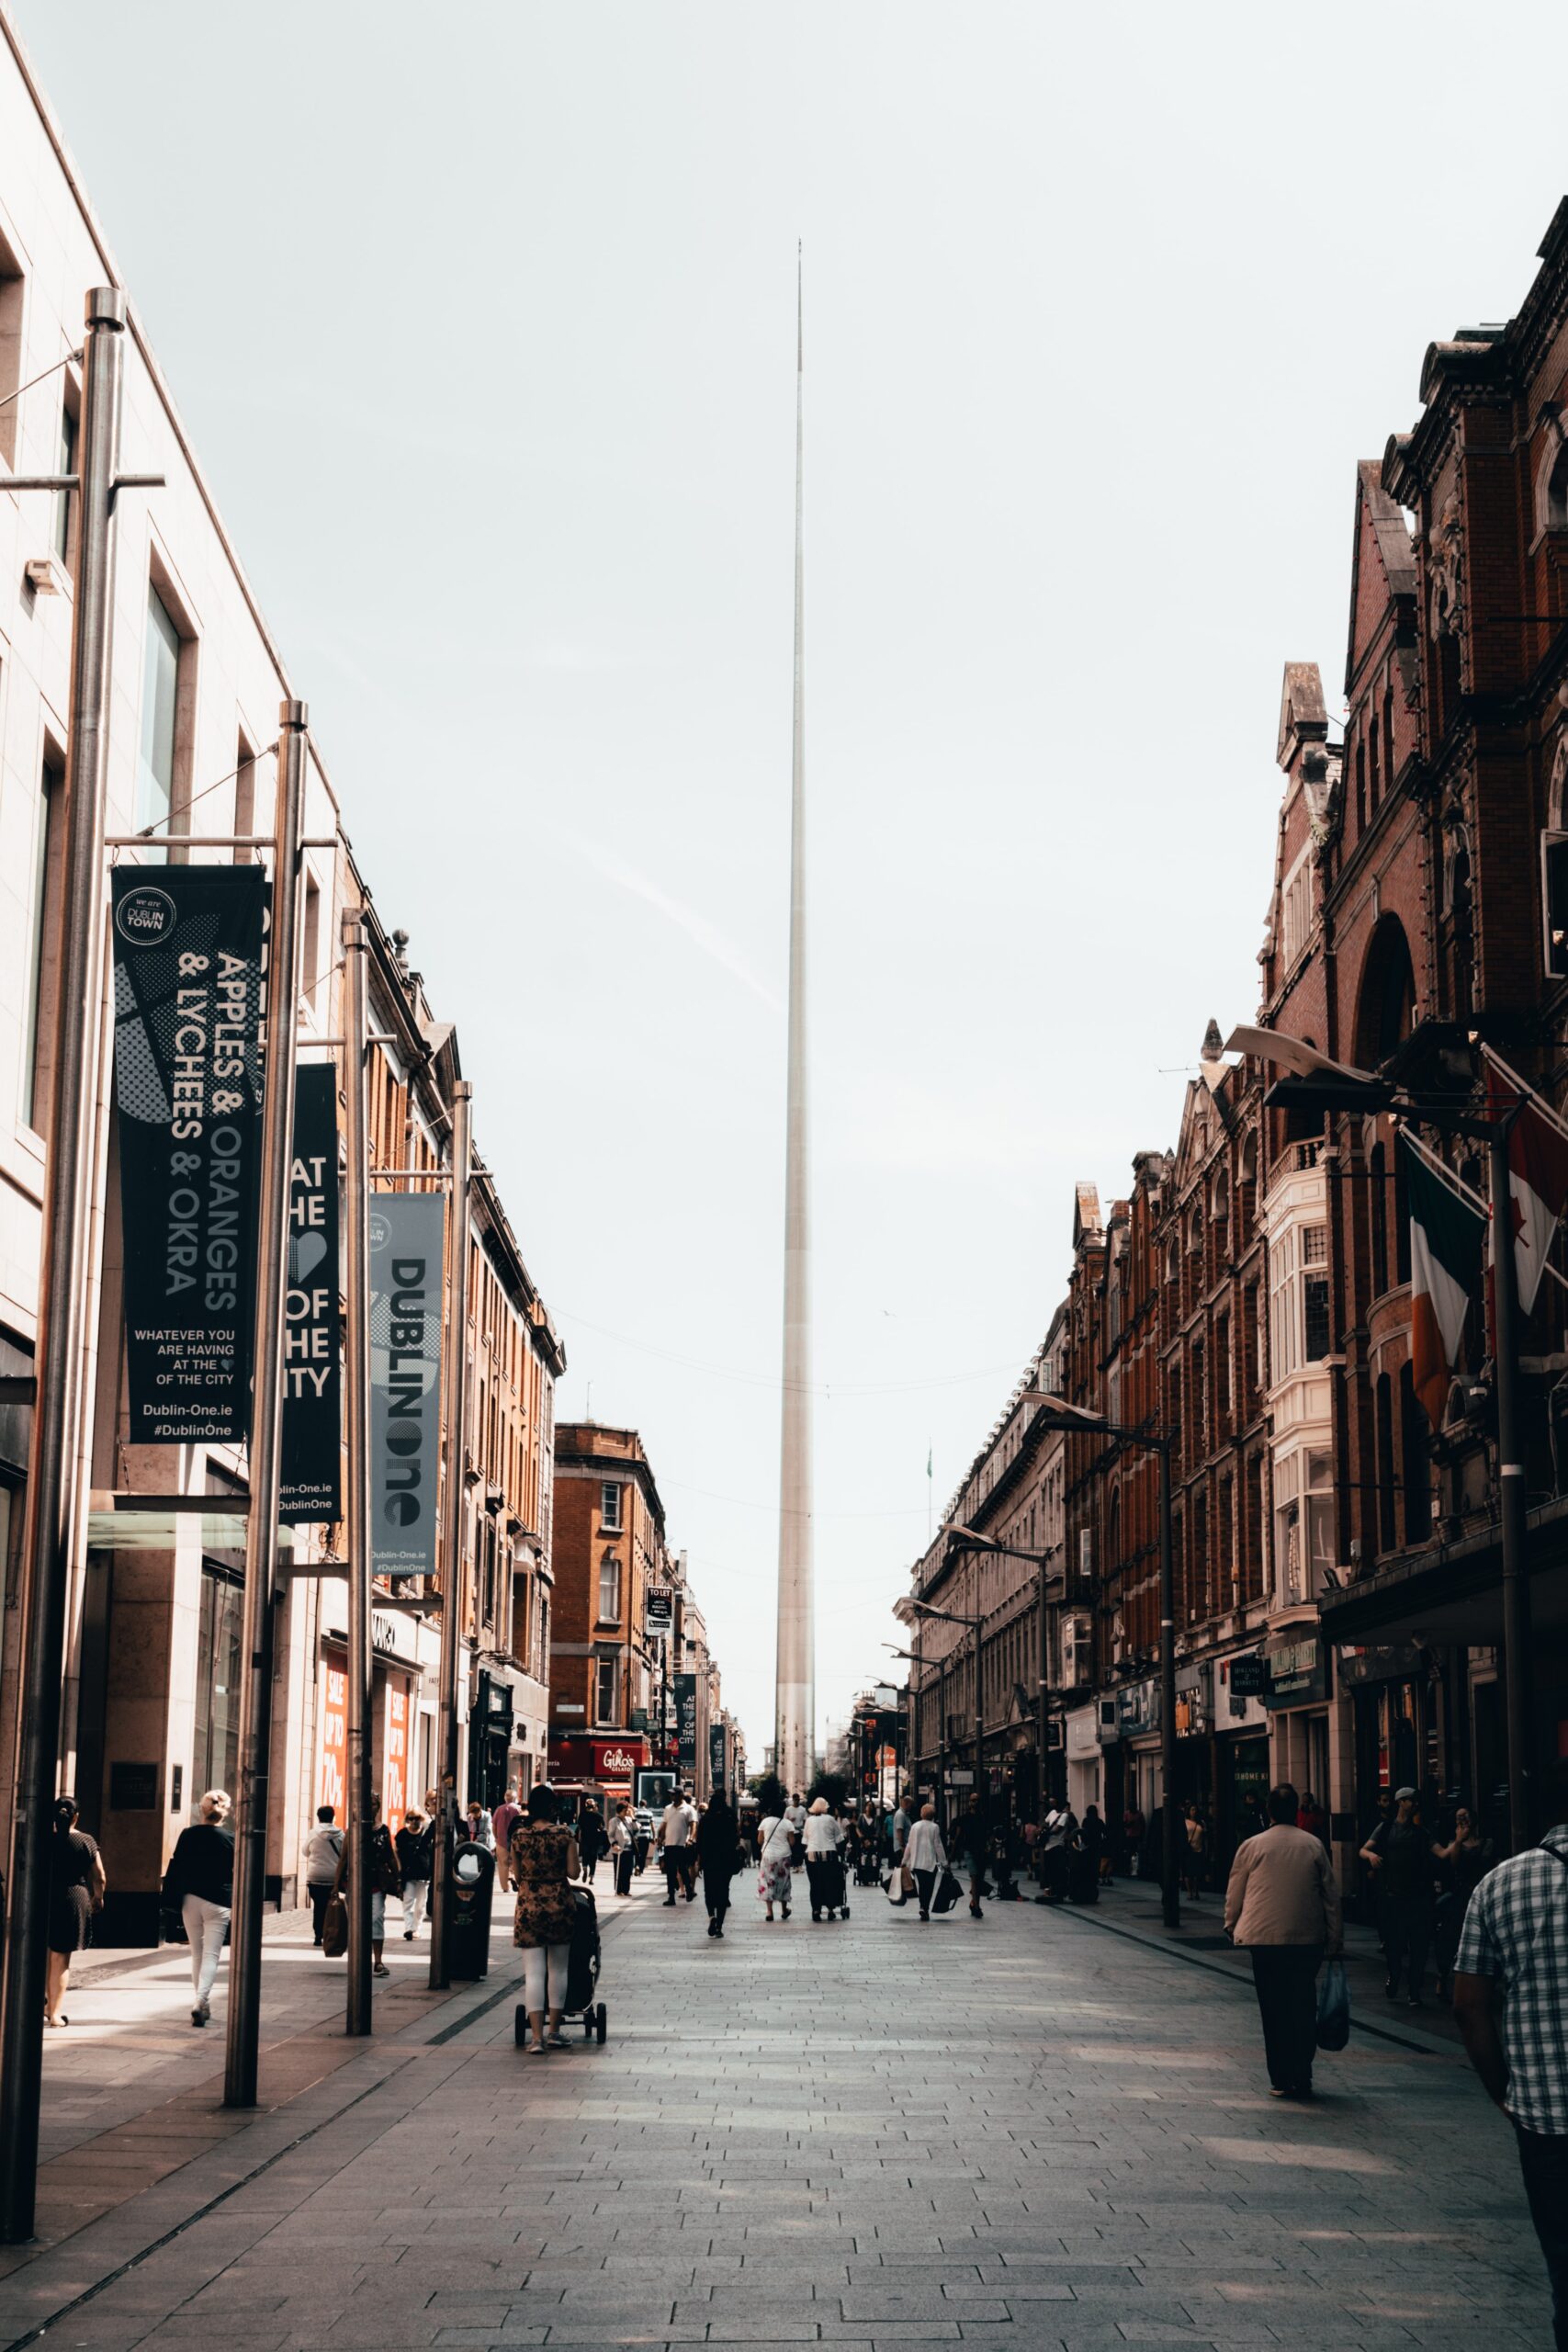 The Spire in Dublin, which is part of the Ireland Travel Guide